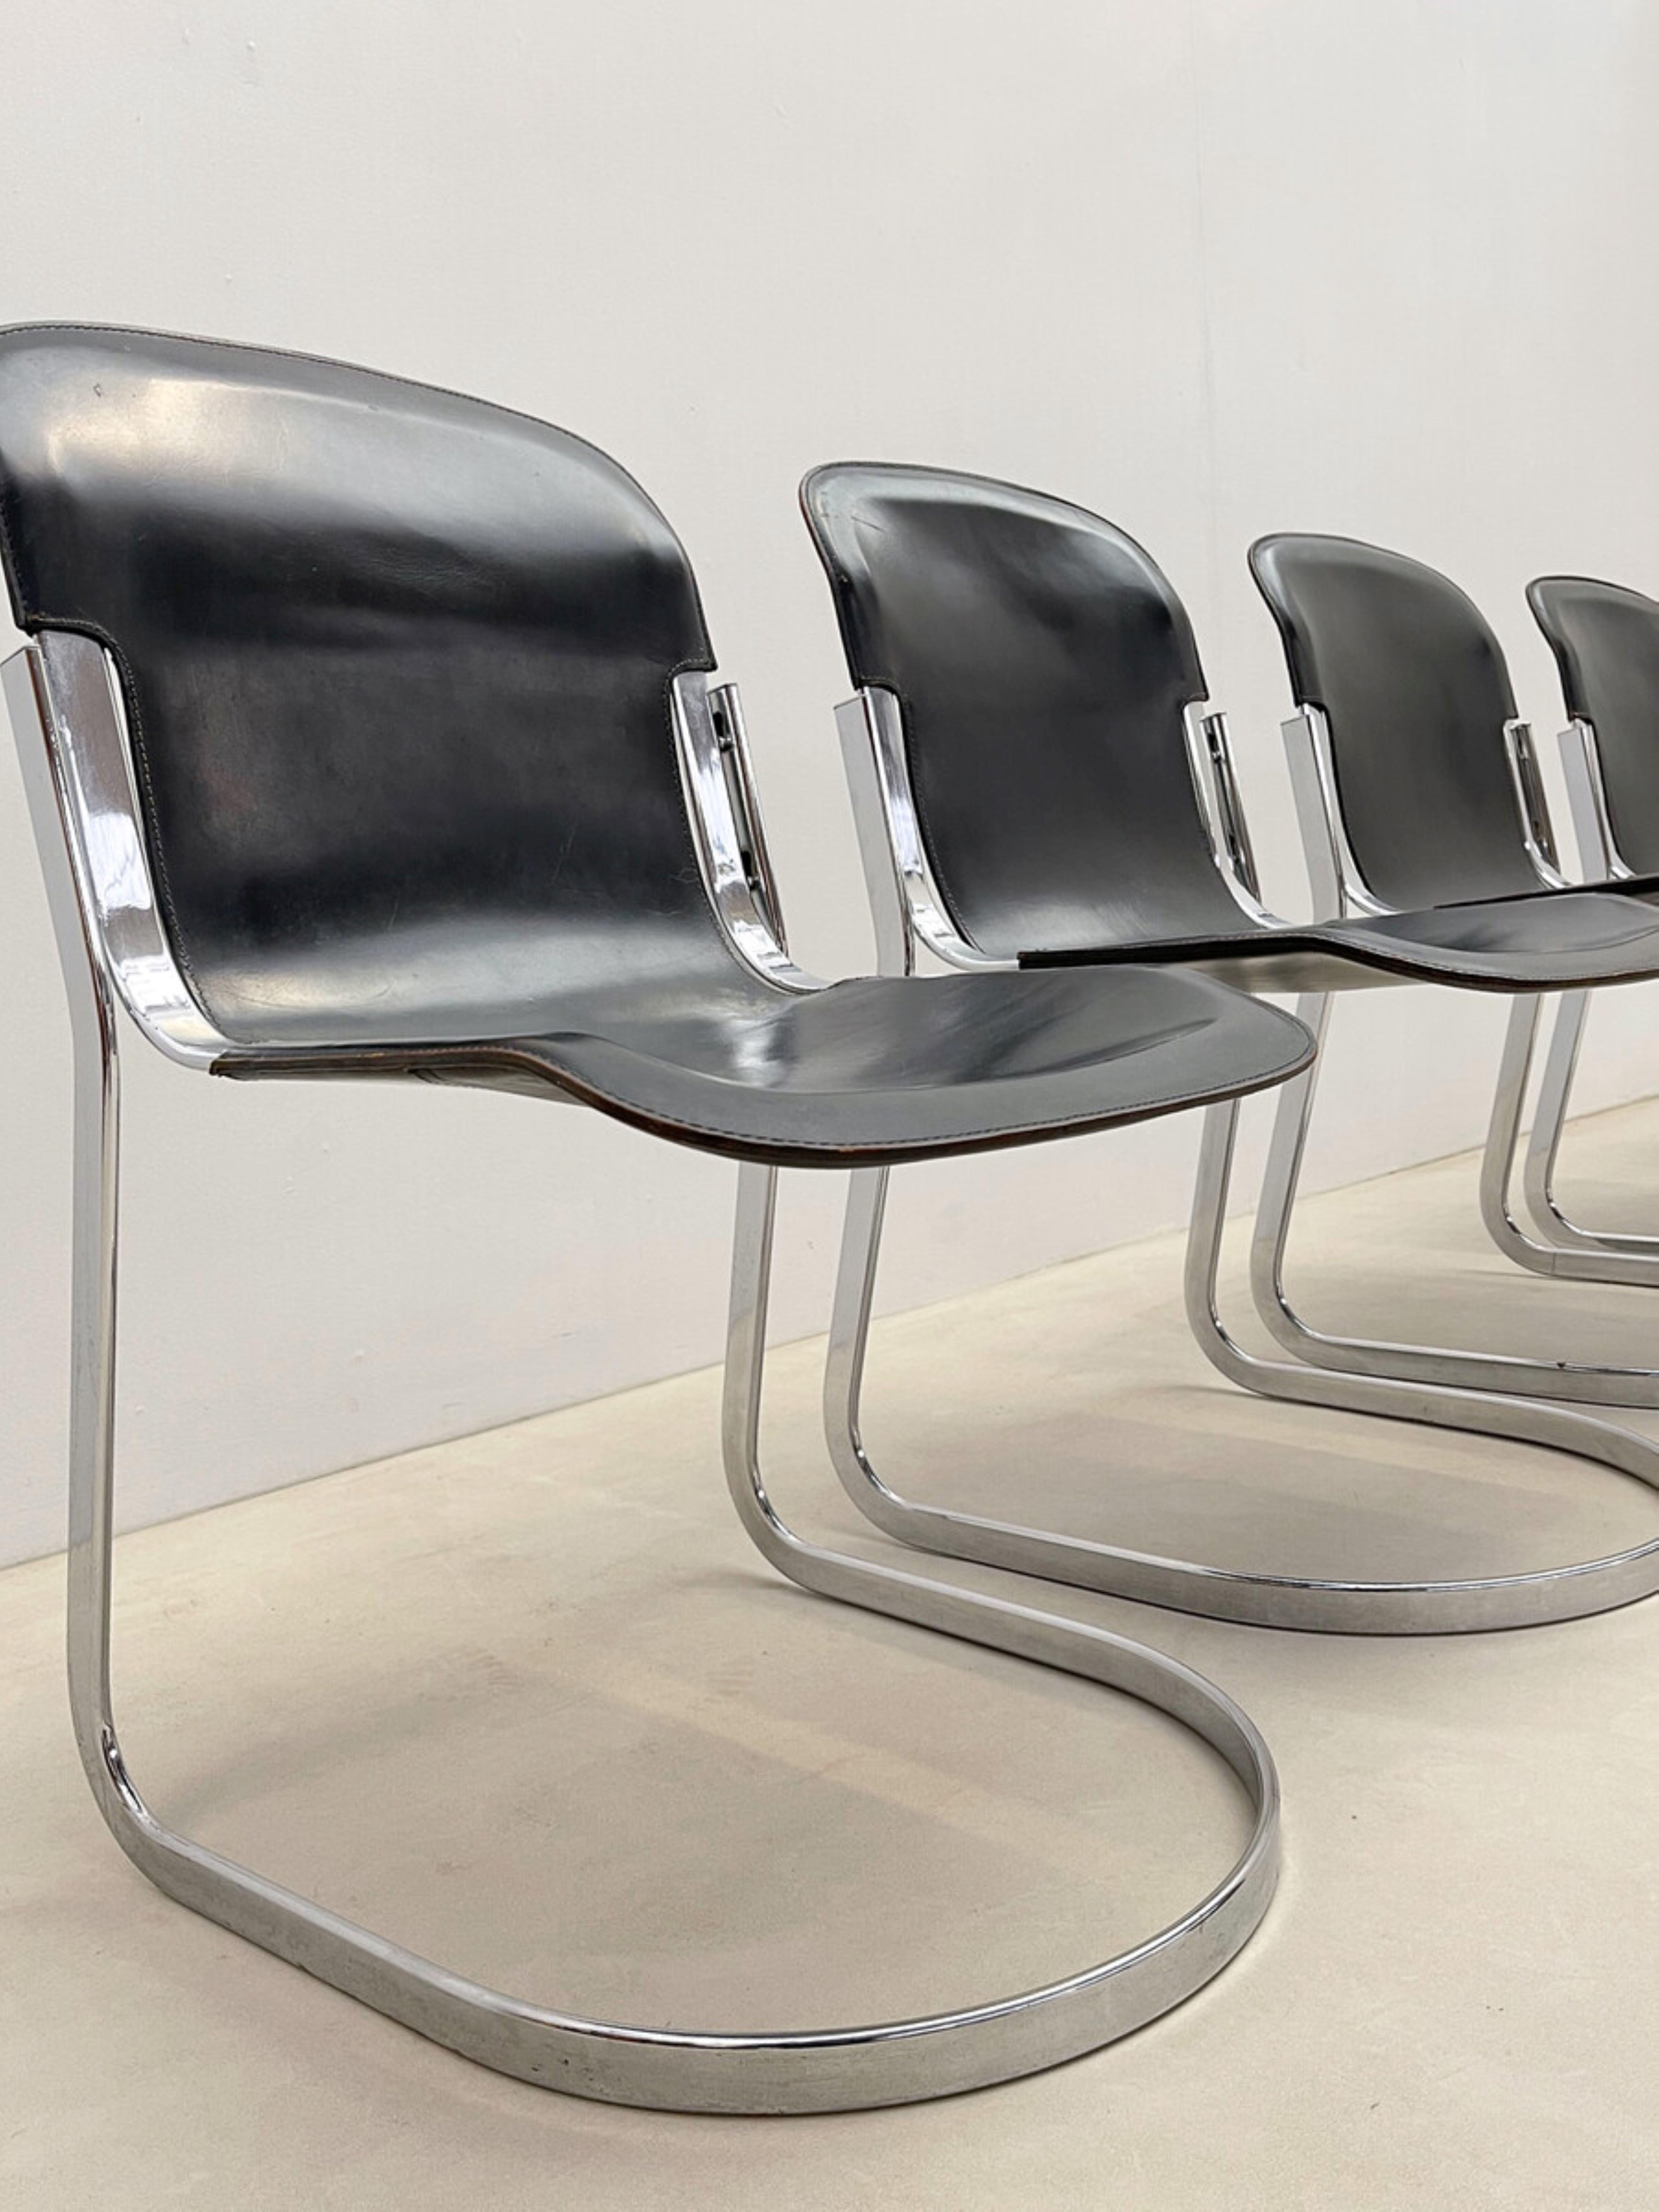 Set of 5 Dining Chairs by Willy Rizzo for Cidue, Leather and Steel, Italy, 1970 For Sale 1